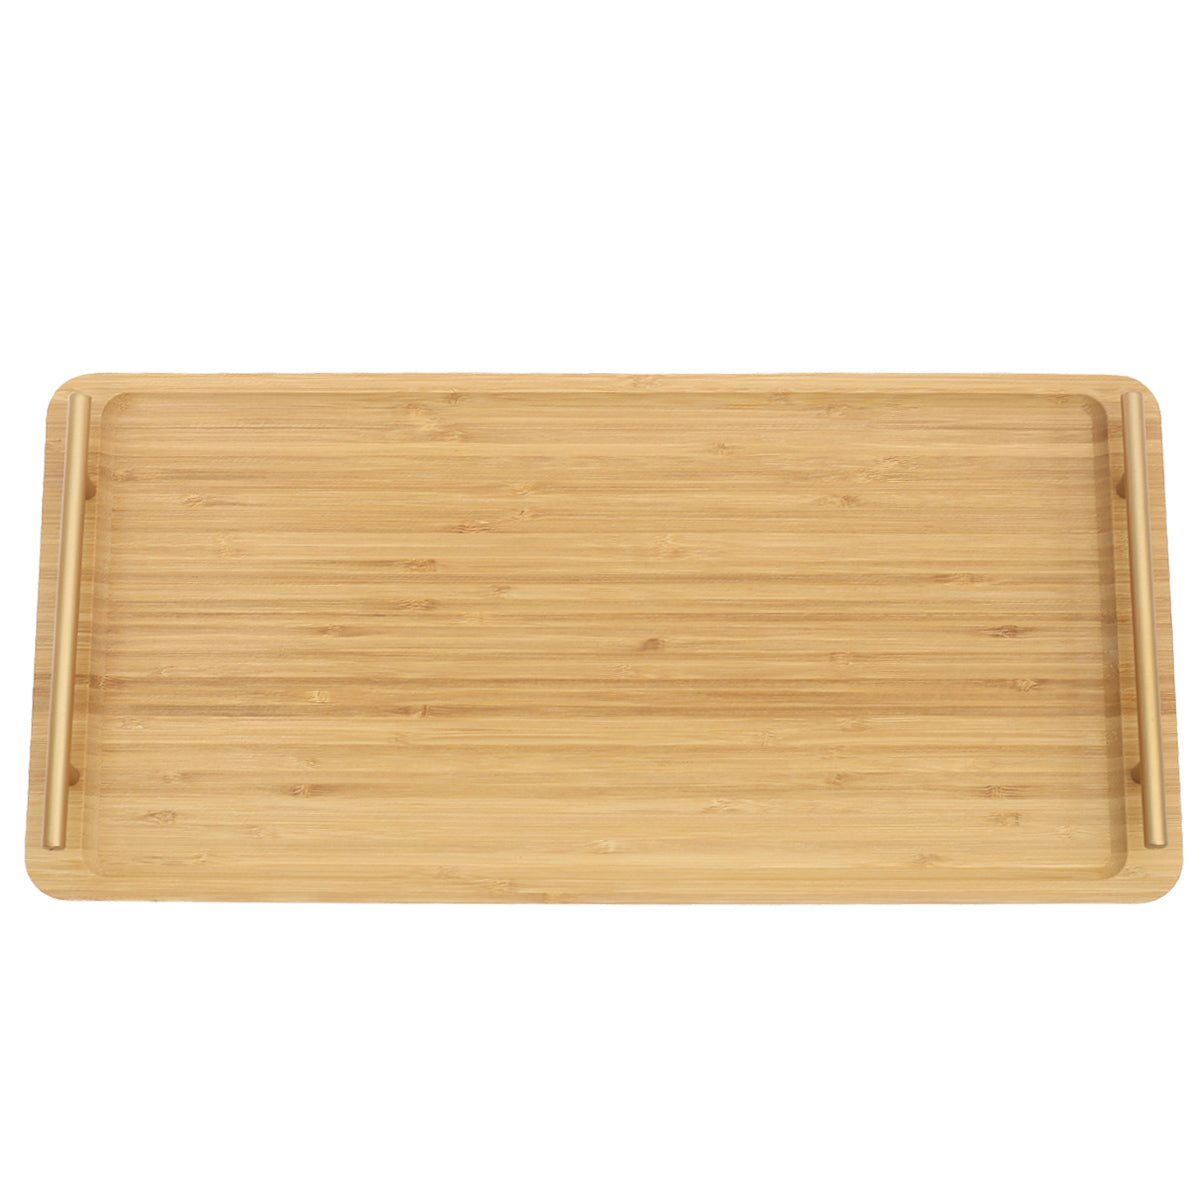 Wooden Tray Large ABC-01